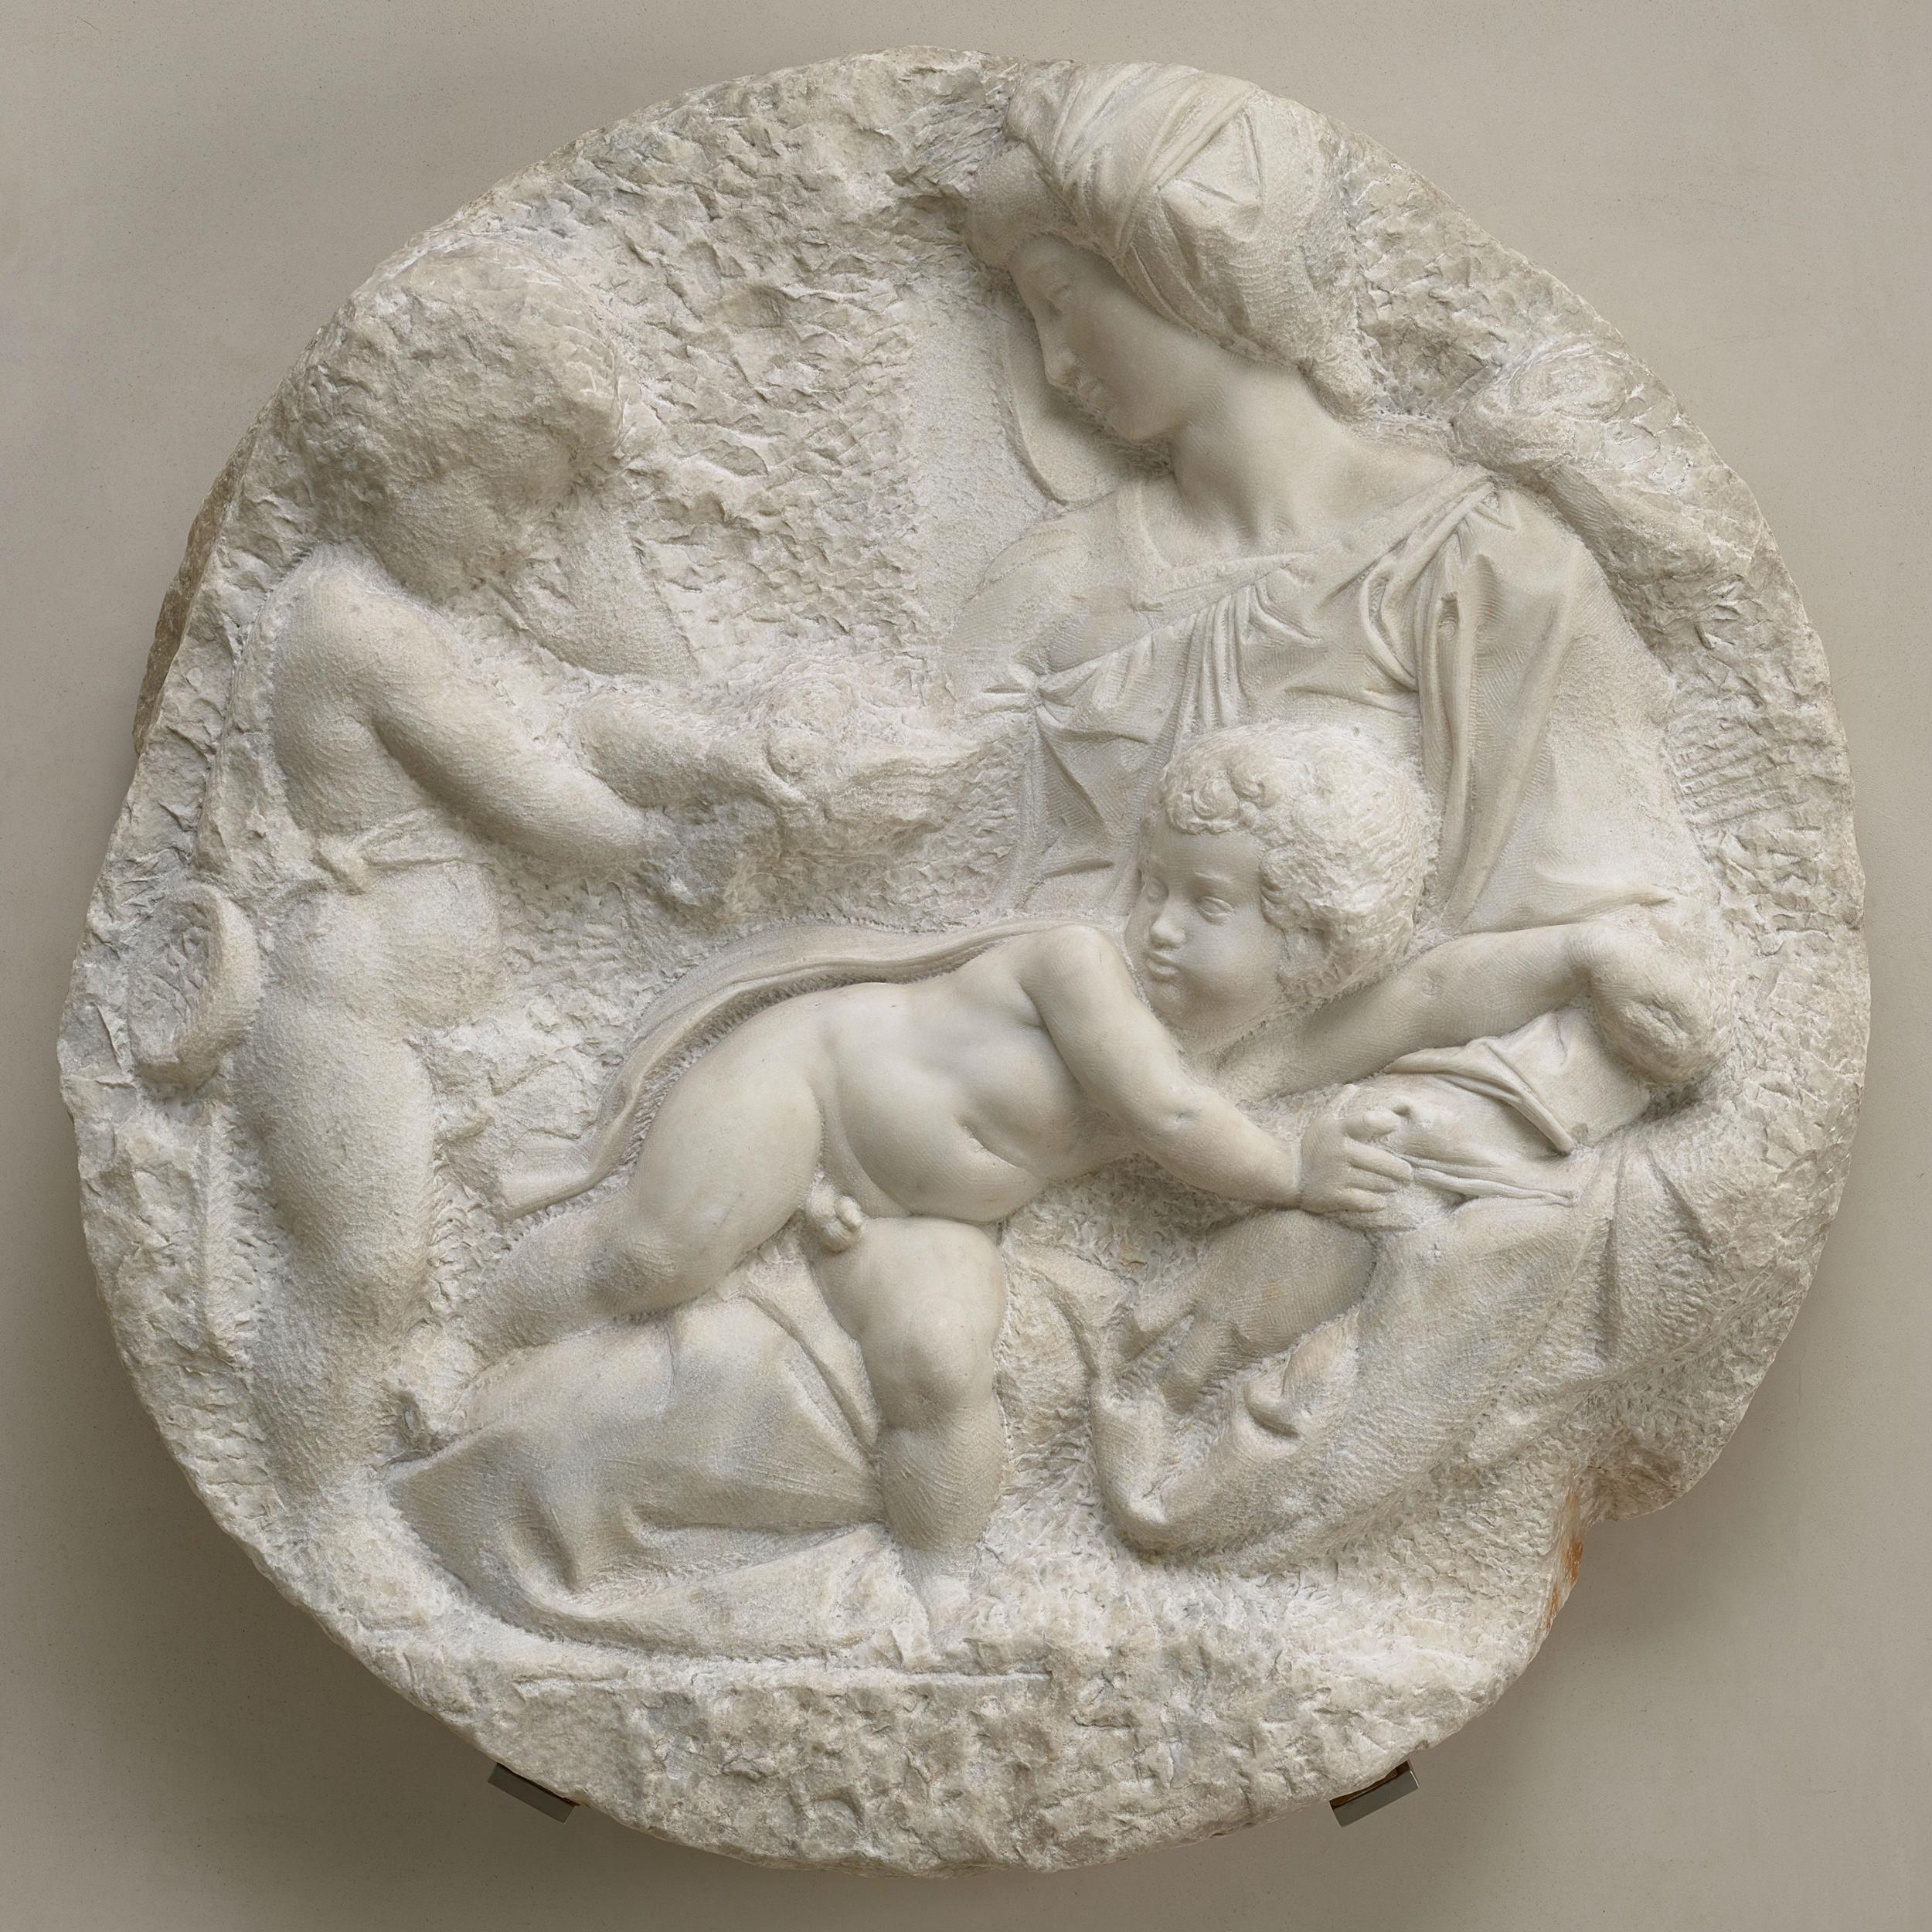 Michelangelo's 'The Virgin and Child with the Infant St John' was bequeathed to the Royal Academy by Sir George Beaumont in 1830